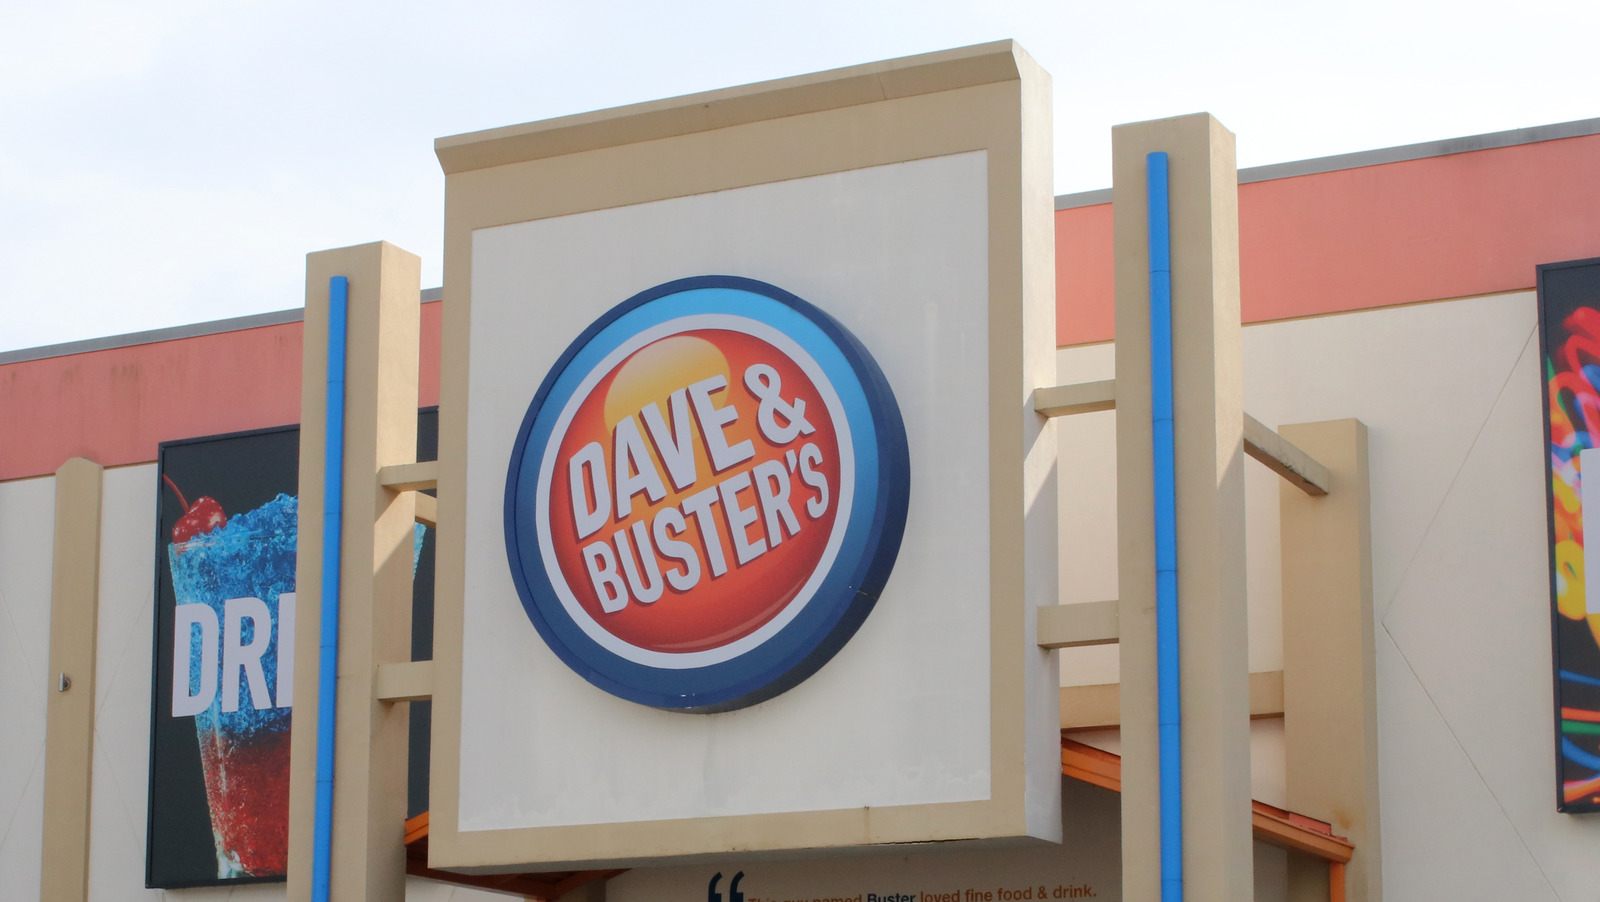 david busters cost